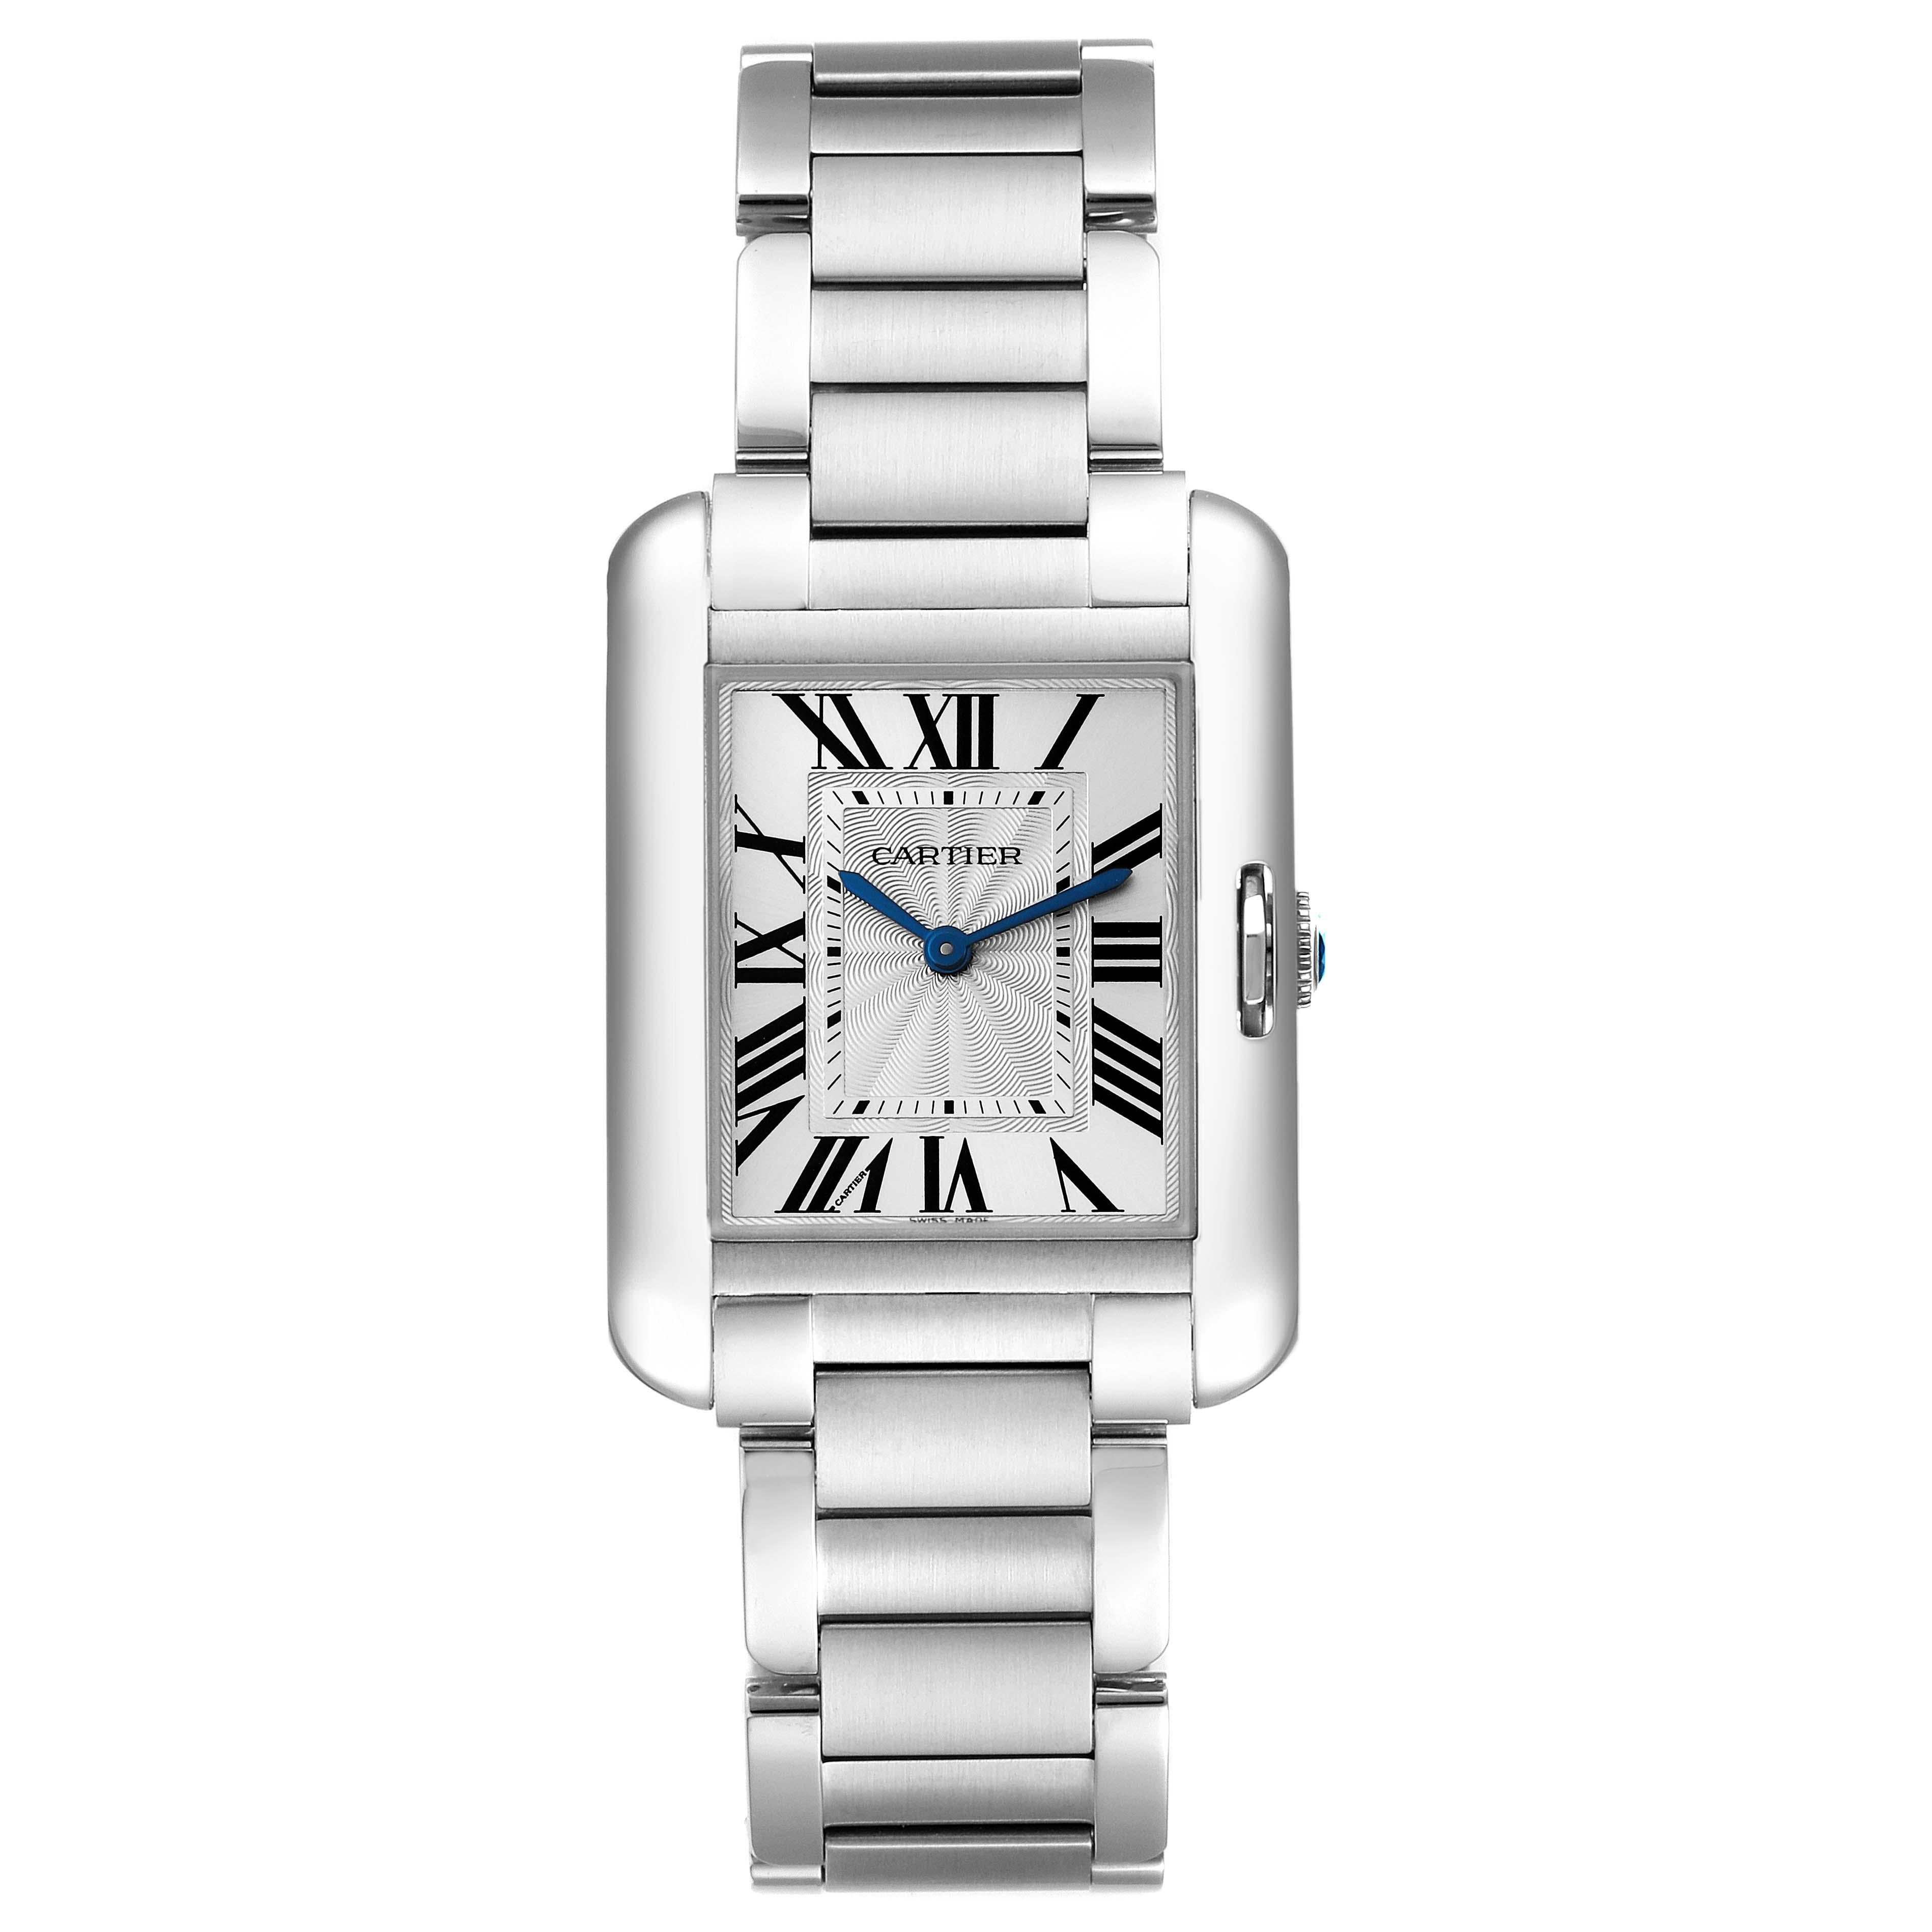 Cartier Tank Anglaise Midsize Steel Ladies Watch W5310044 Box Card. Quartz movement. Stainless steel case 30.2 x 22.7 mm. Circular grained crown set with the blue spinel cabochon. . Scratch resistant sapphire crystal. Flinque and silvered dial with